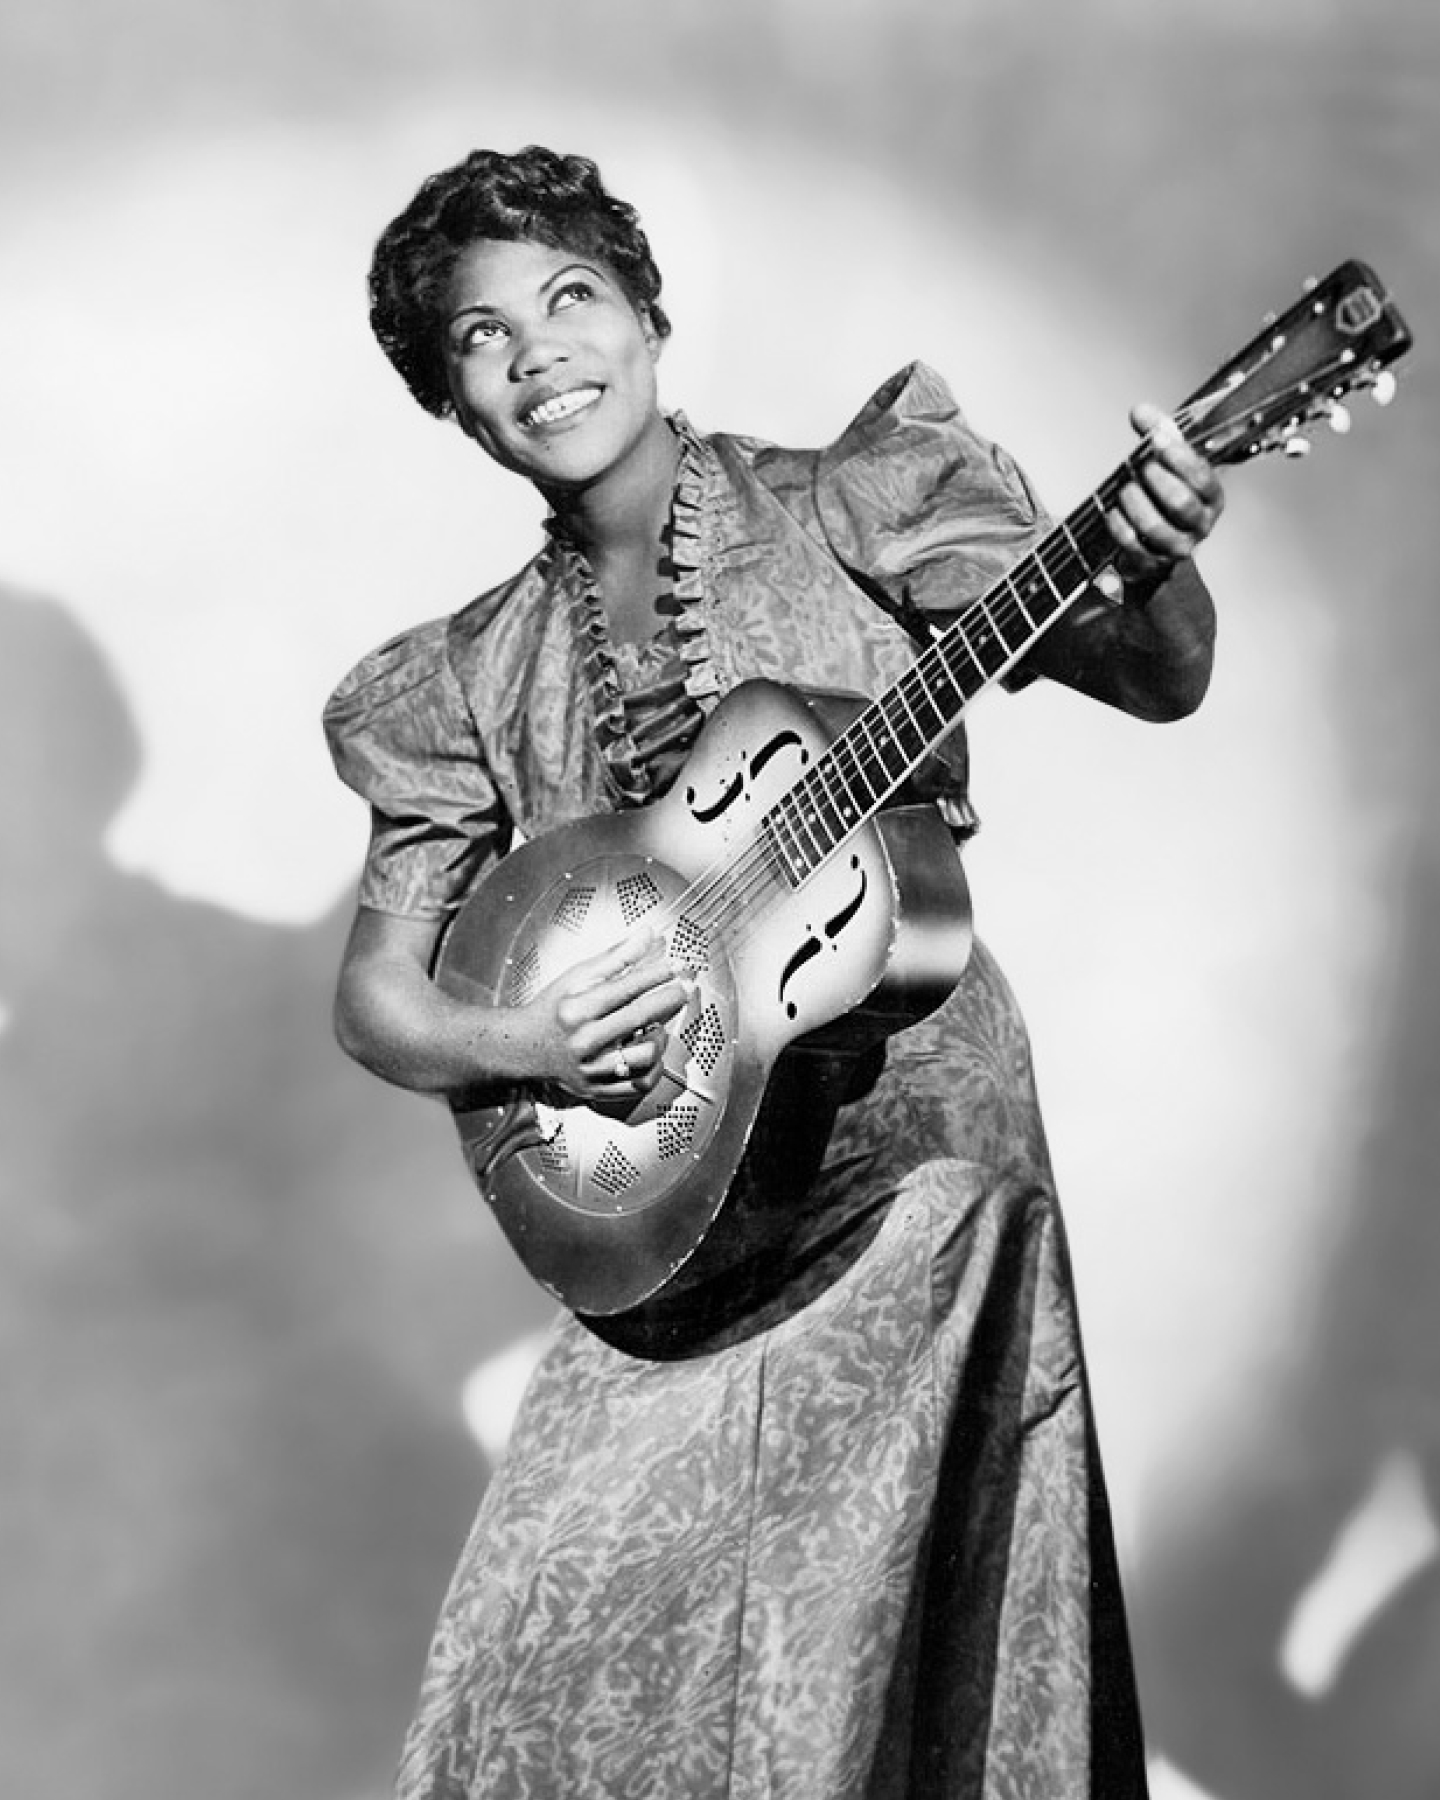 Black-and-white photo of a smiling woman holding a resonator guitar, dressed in a ruffled blouse and patterned dress.